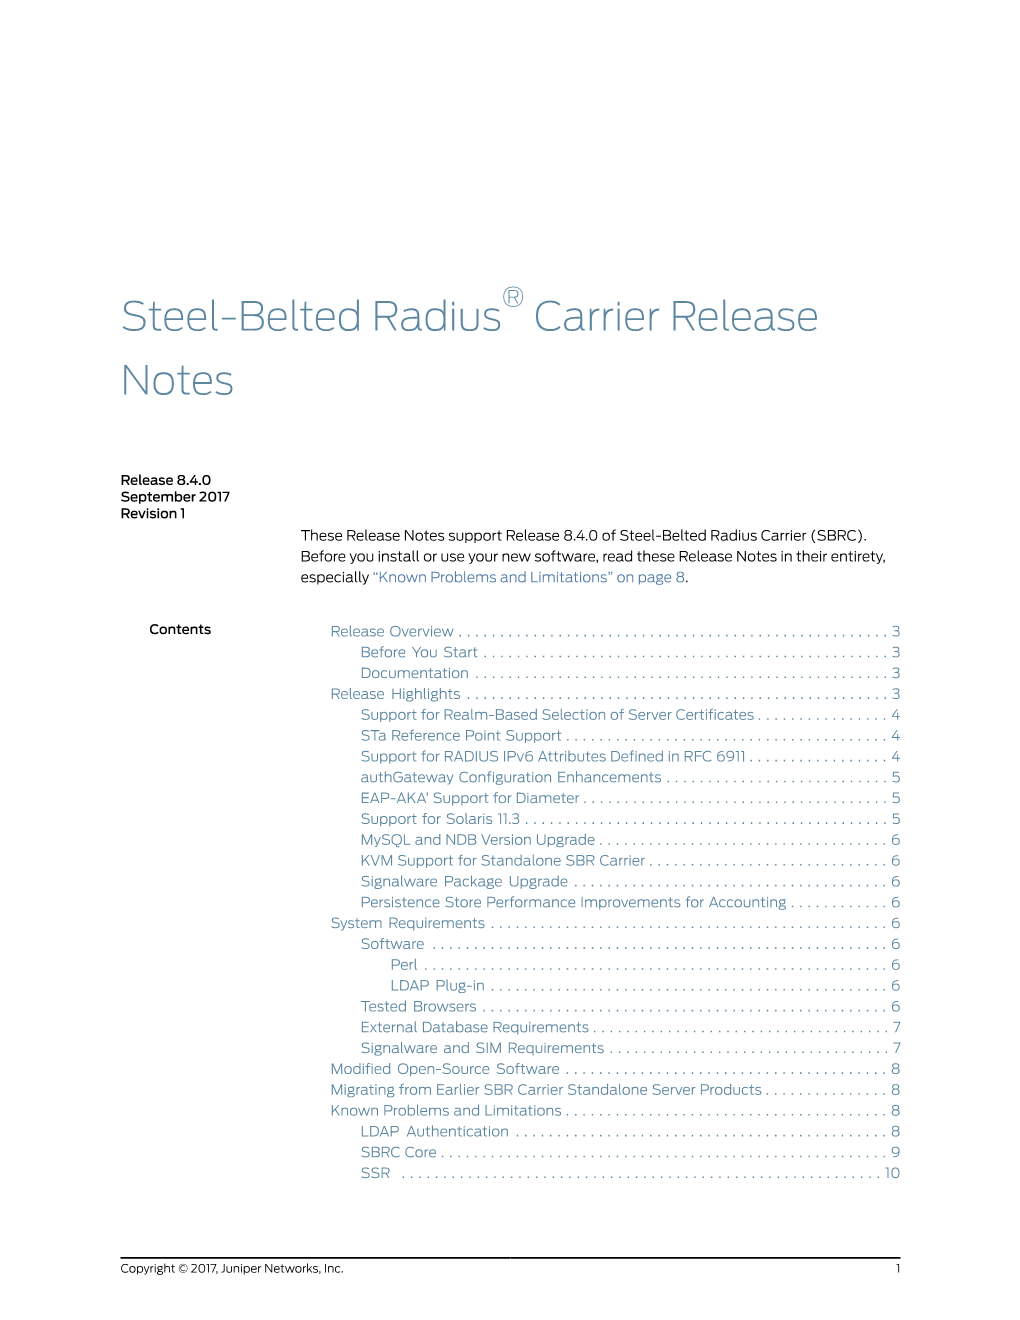 Steel-Belted Radius® Carrier Release Notes